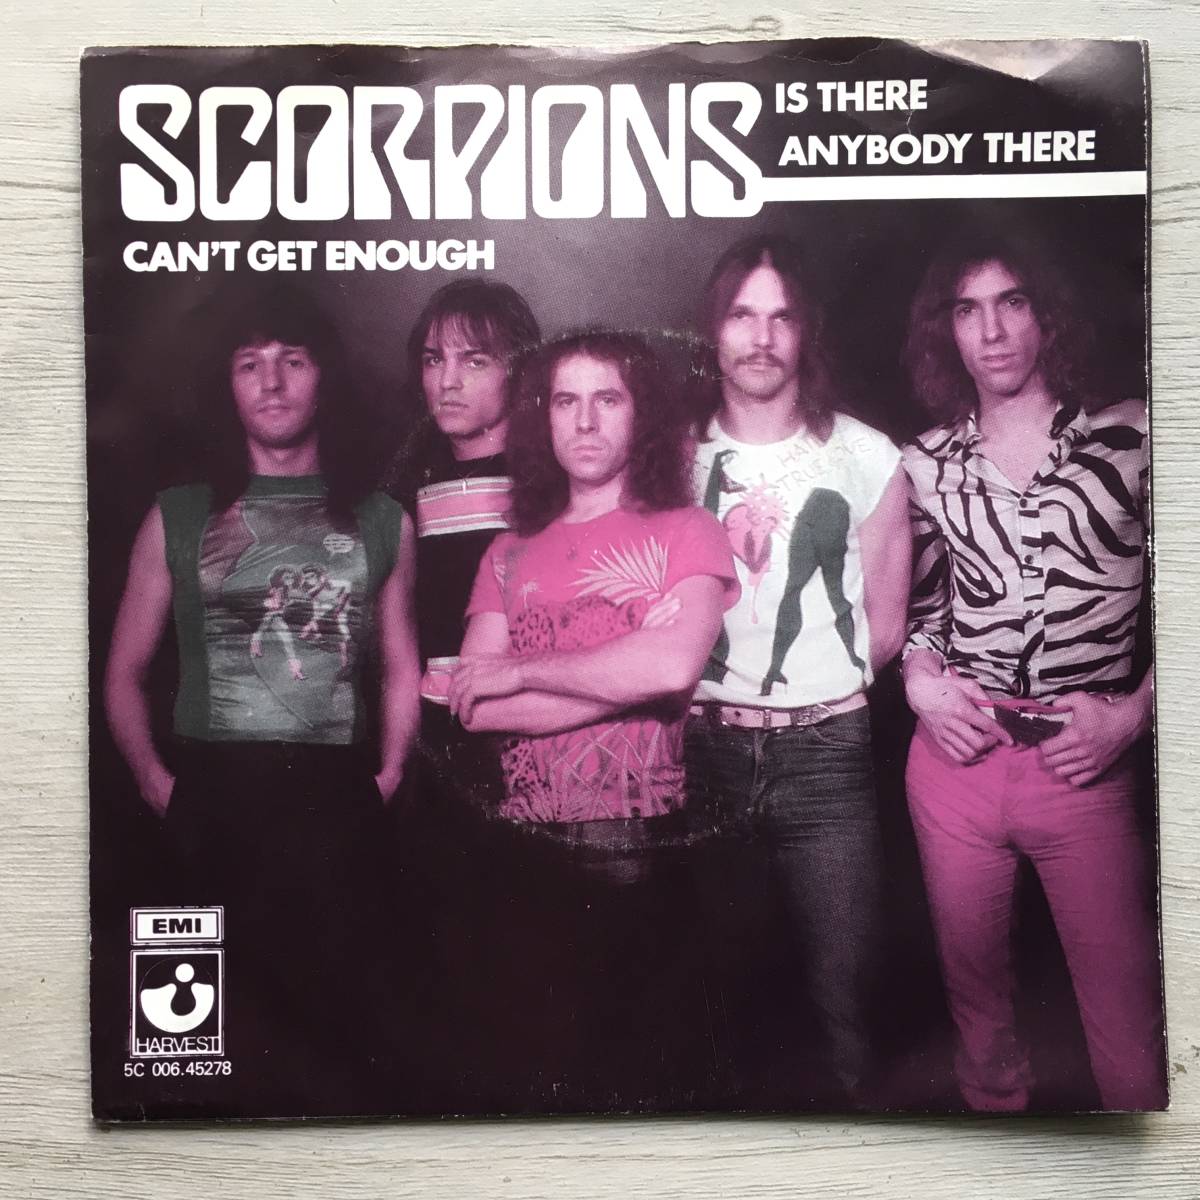 SCORPIONS IS THERE ANYBODY THERE オランダ盤_画像1